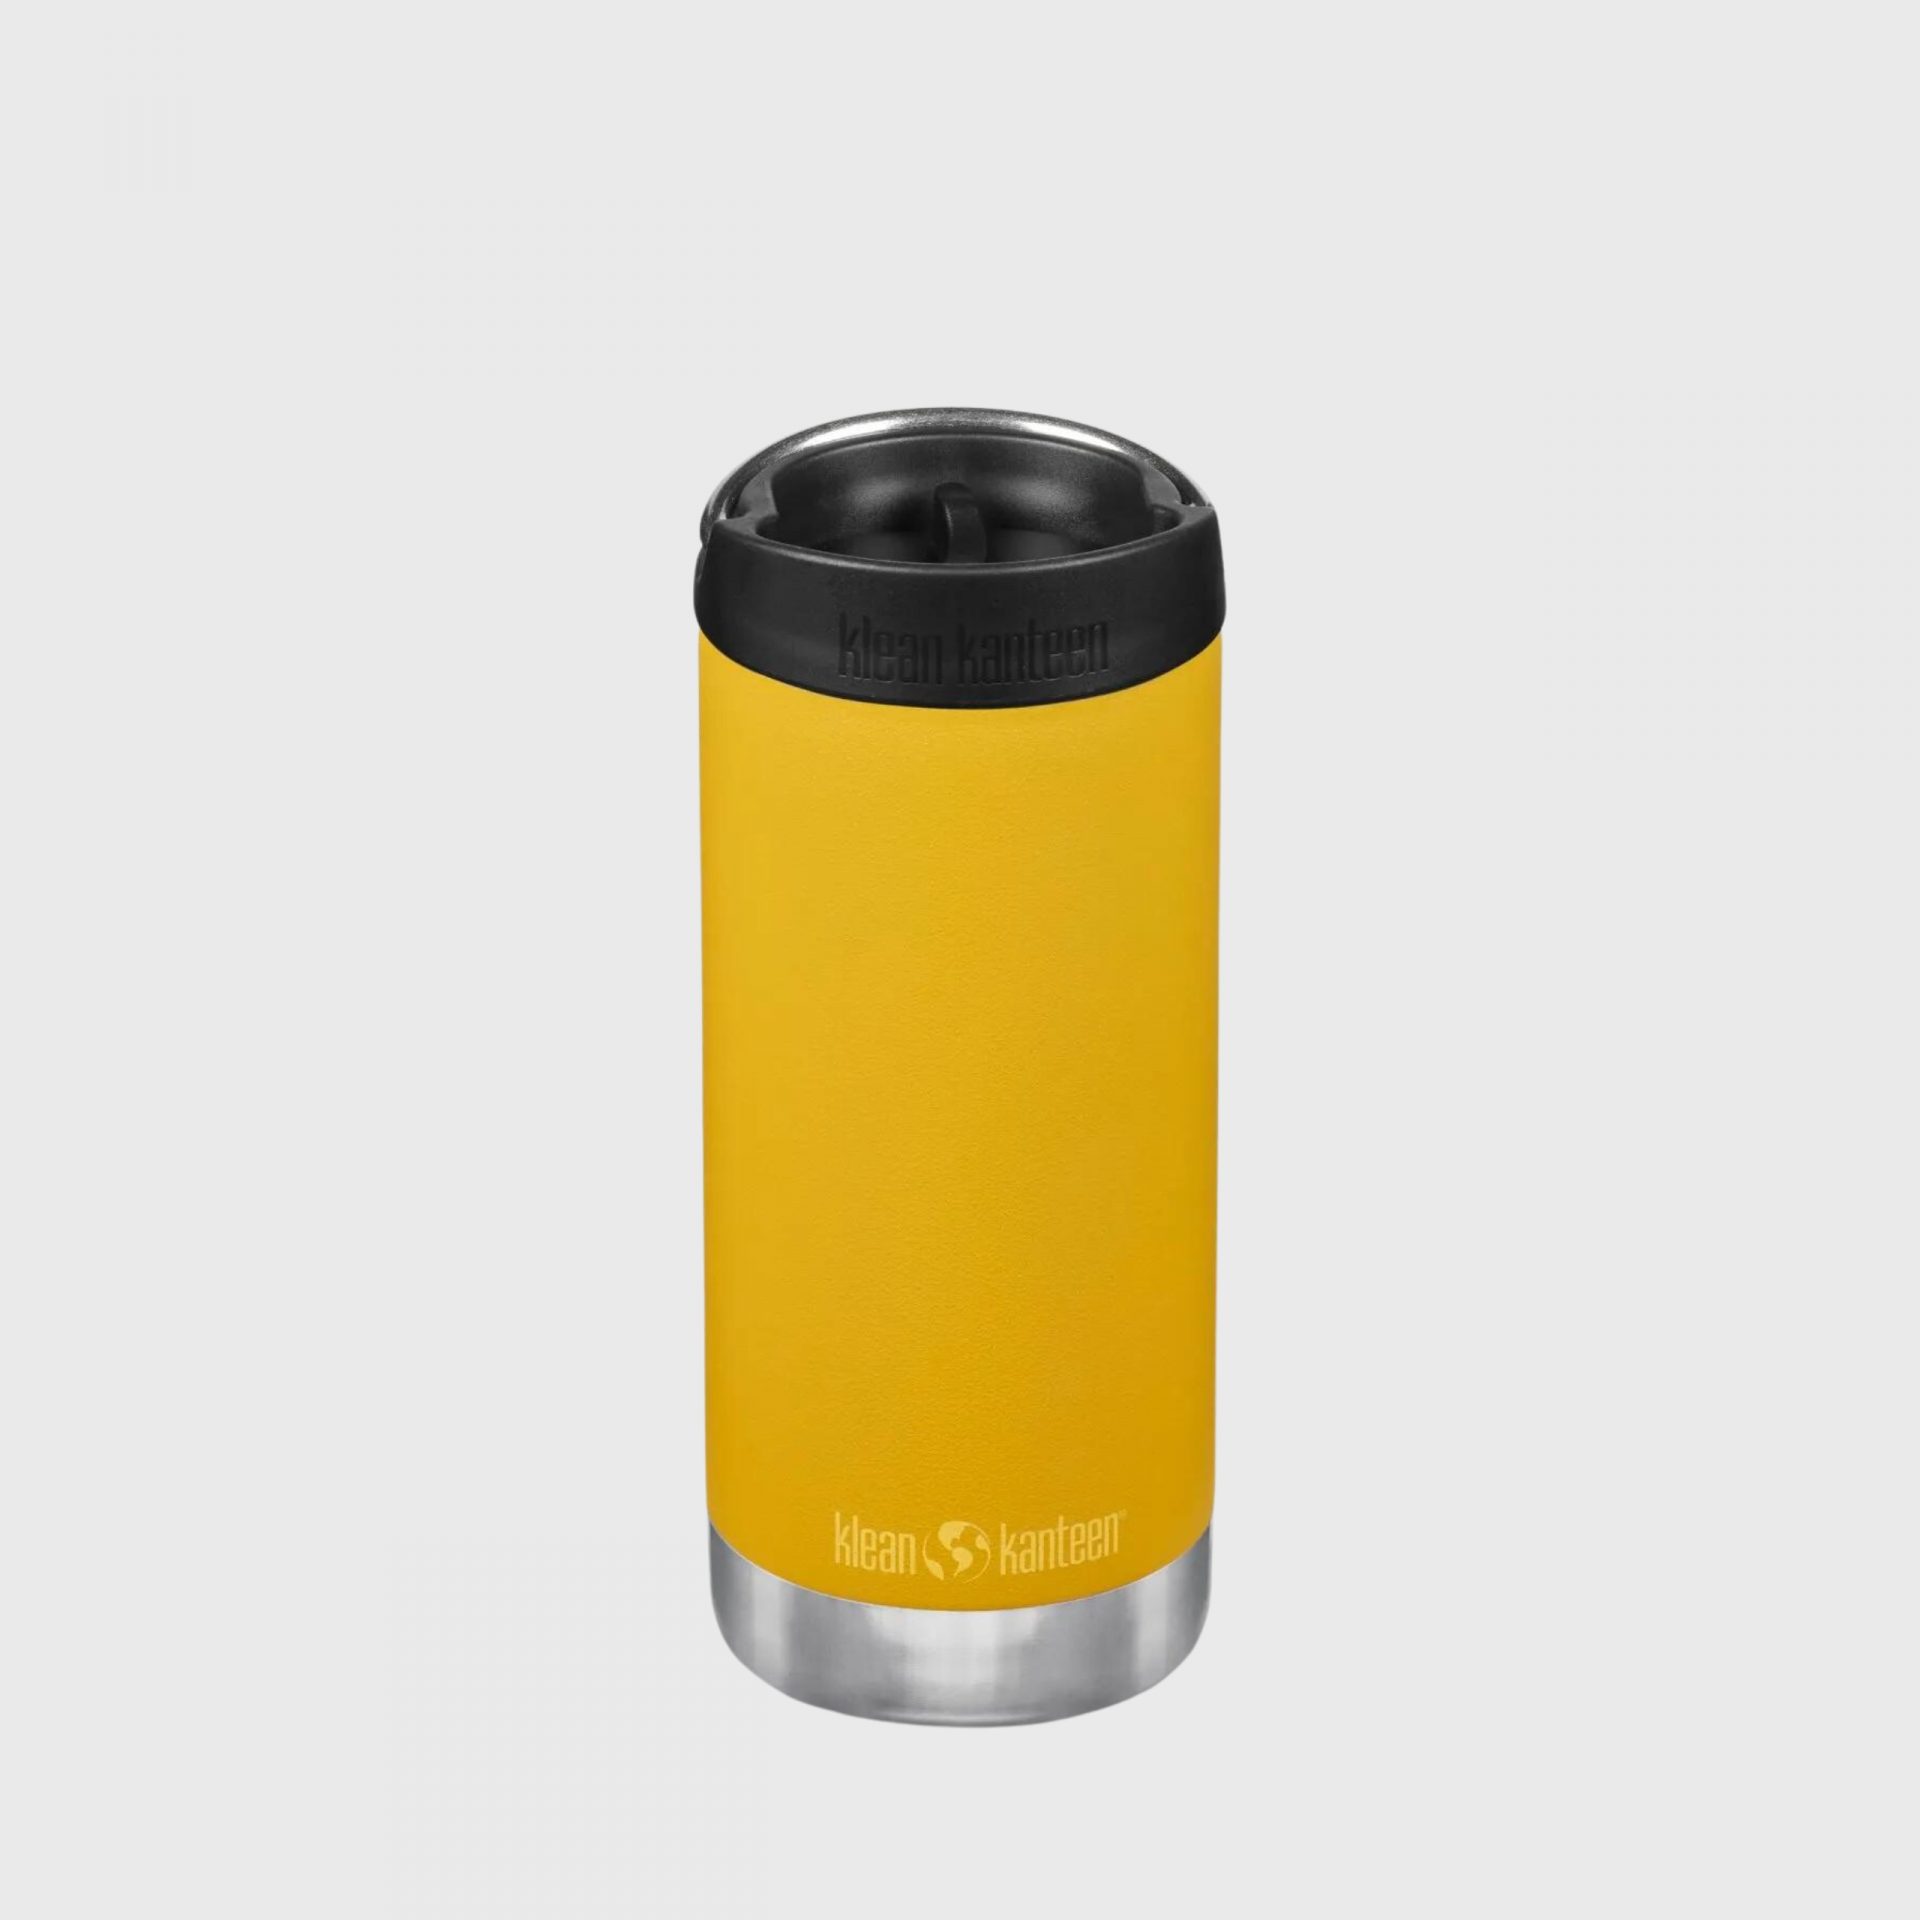 Klean Kanteen Singapore Sustainable Corporate Gifts 12 oz TKWide Insulated Coffee Tumbler with Café Cap Marigold